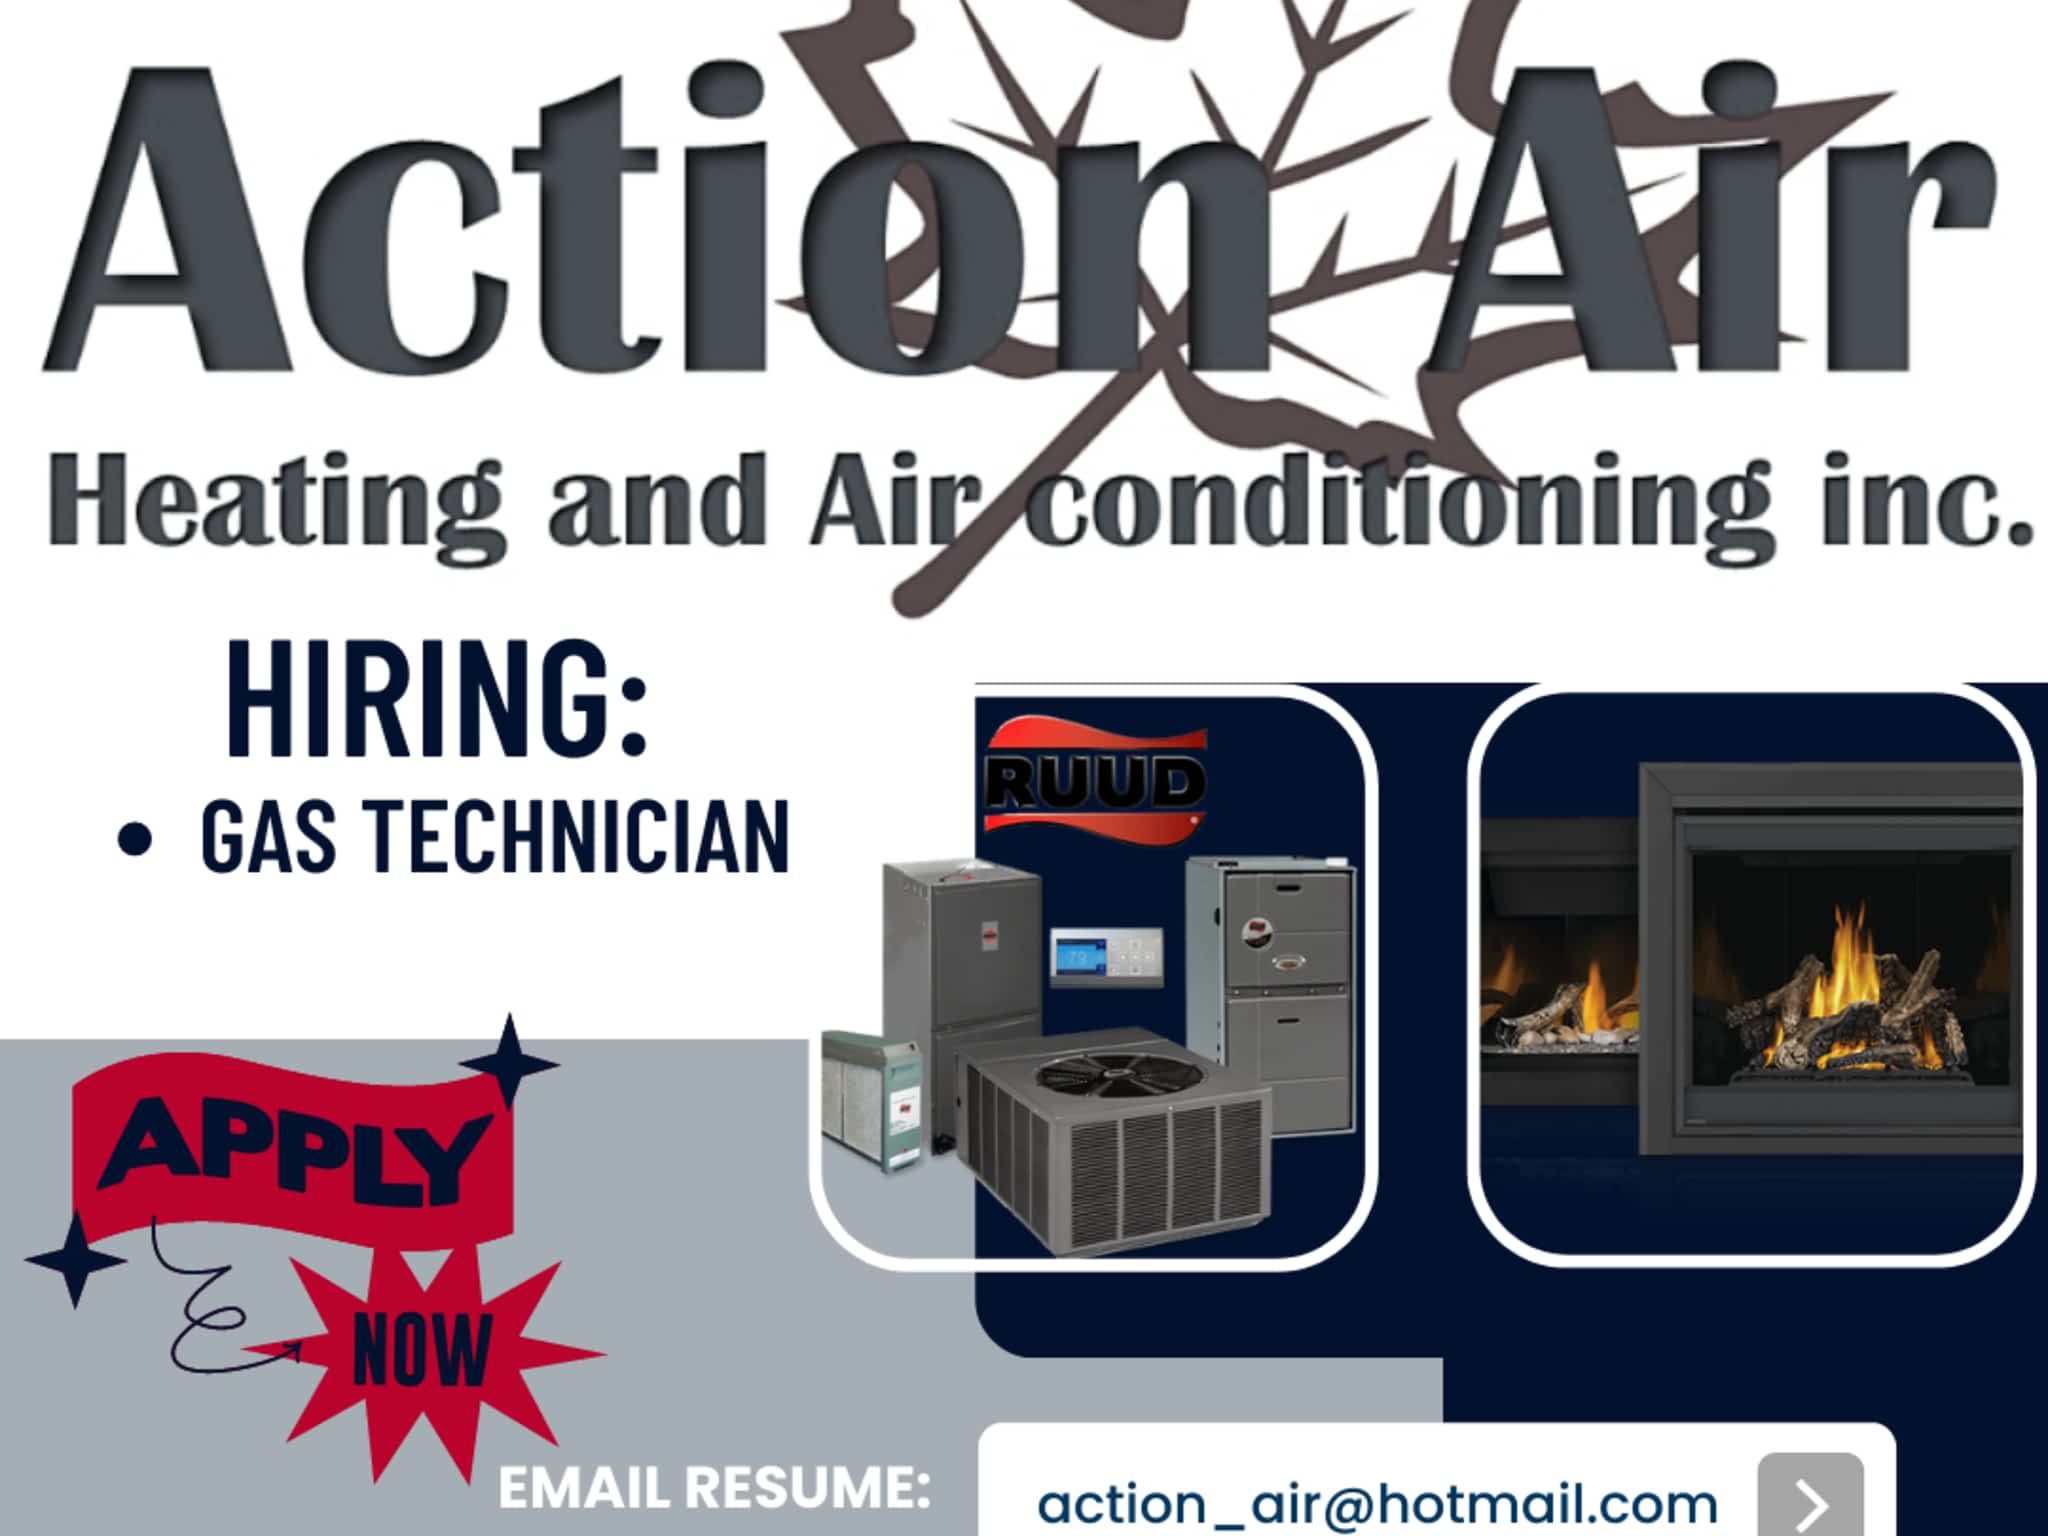 photo Action Air Heating and Air Conditioning Inc